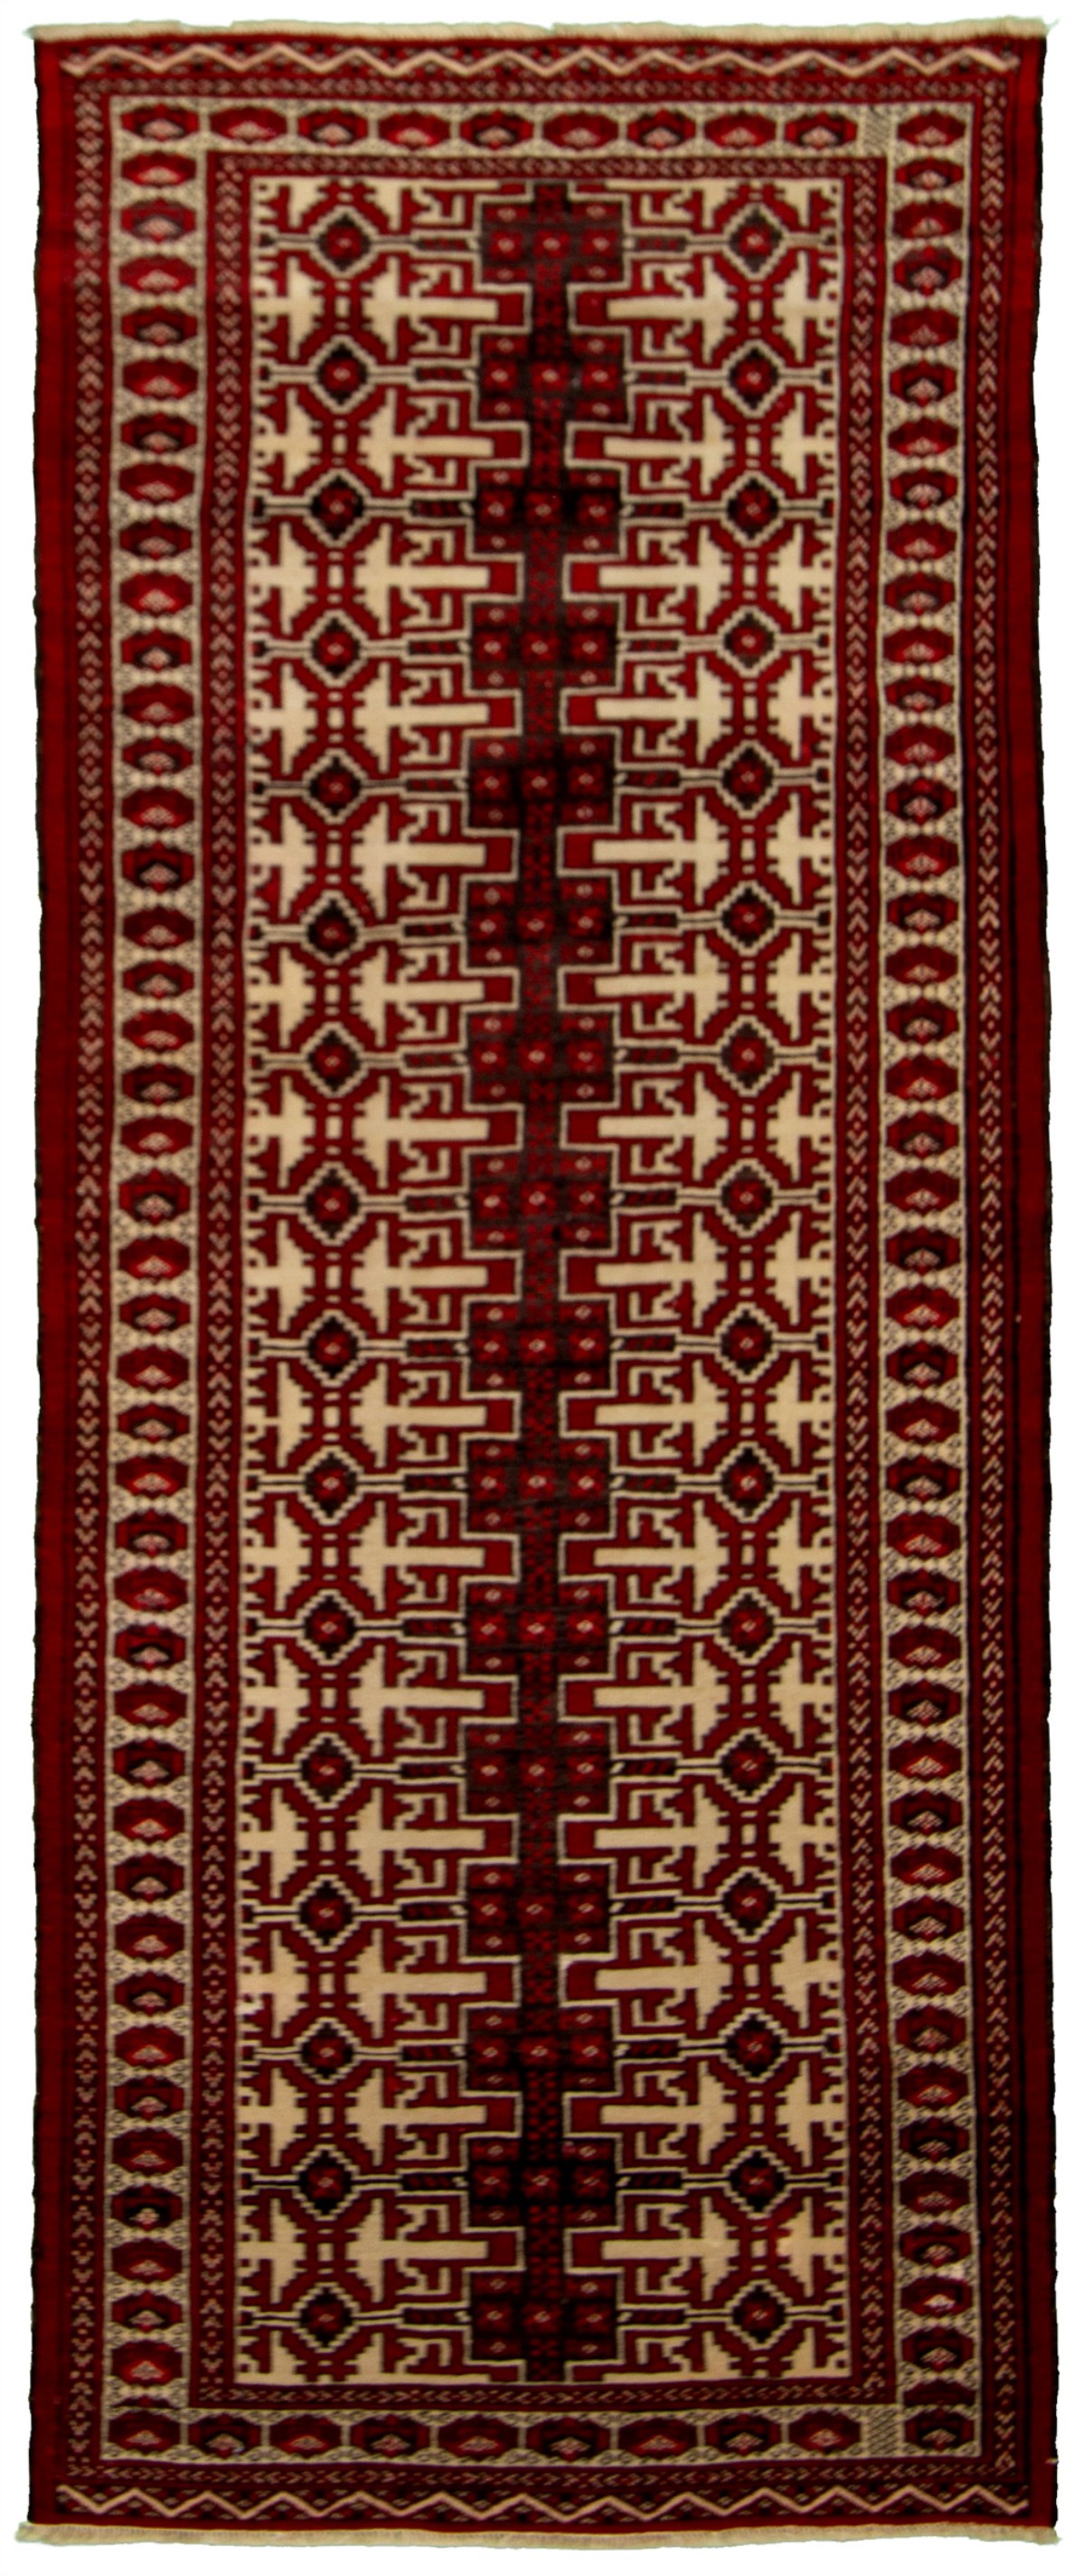 Hand-knotted Turkoman Red Wool Rug 2'9" x 7'5" Size: 2'9" x 7'5"  